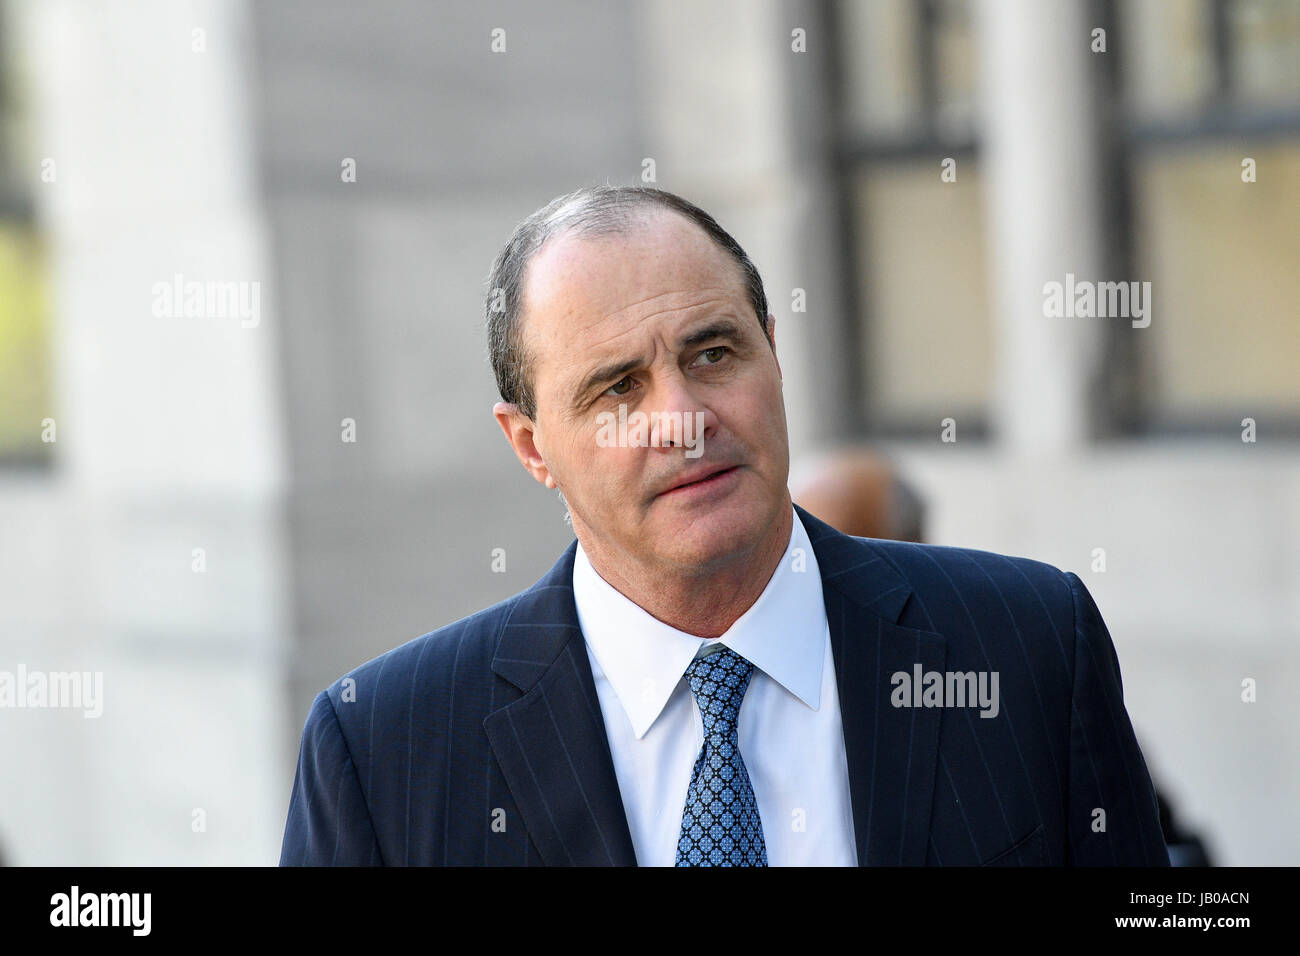 Norristown, Pennsylvania, USA. 8th June, 2017. Bill Cosby's lawyer, BRIAN MCMONAGLE, walks up to the court house in Montgomery County Pa Credit: Ricky Fitchett/ZUMA Wire/Alamy Live News Stock Photo